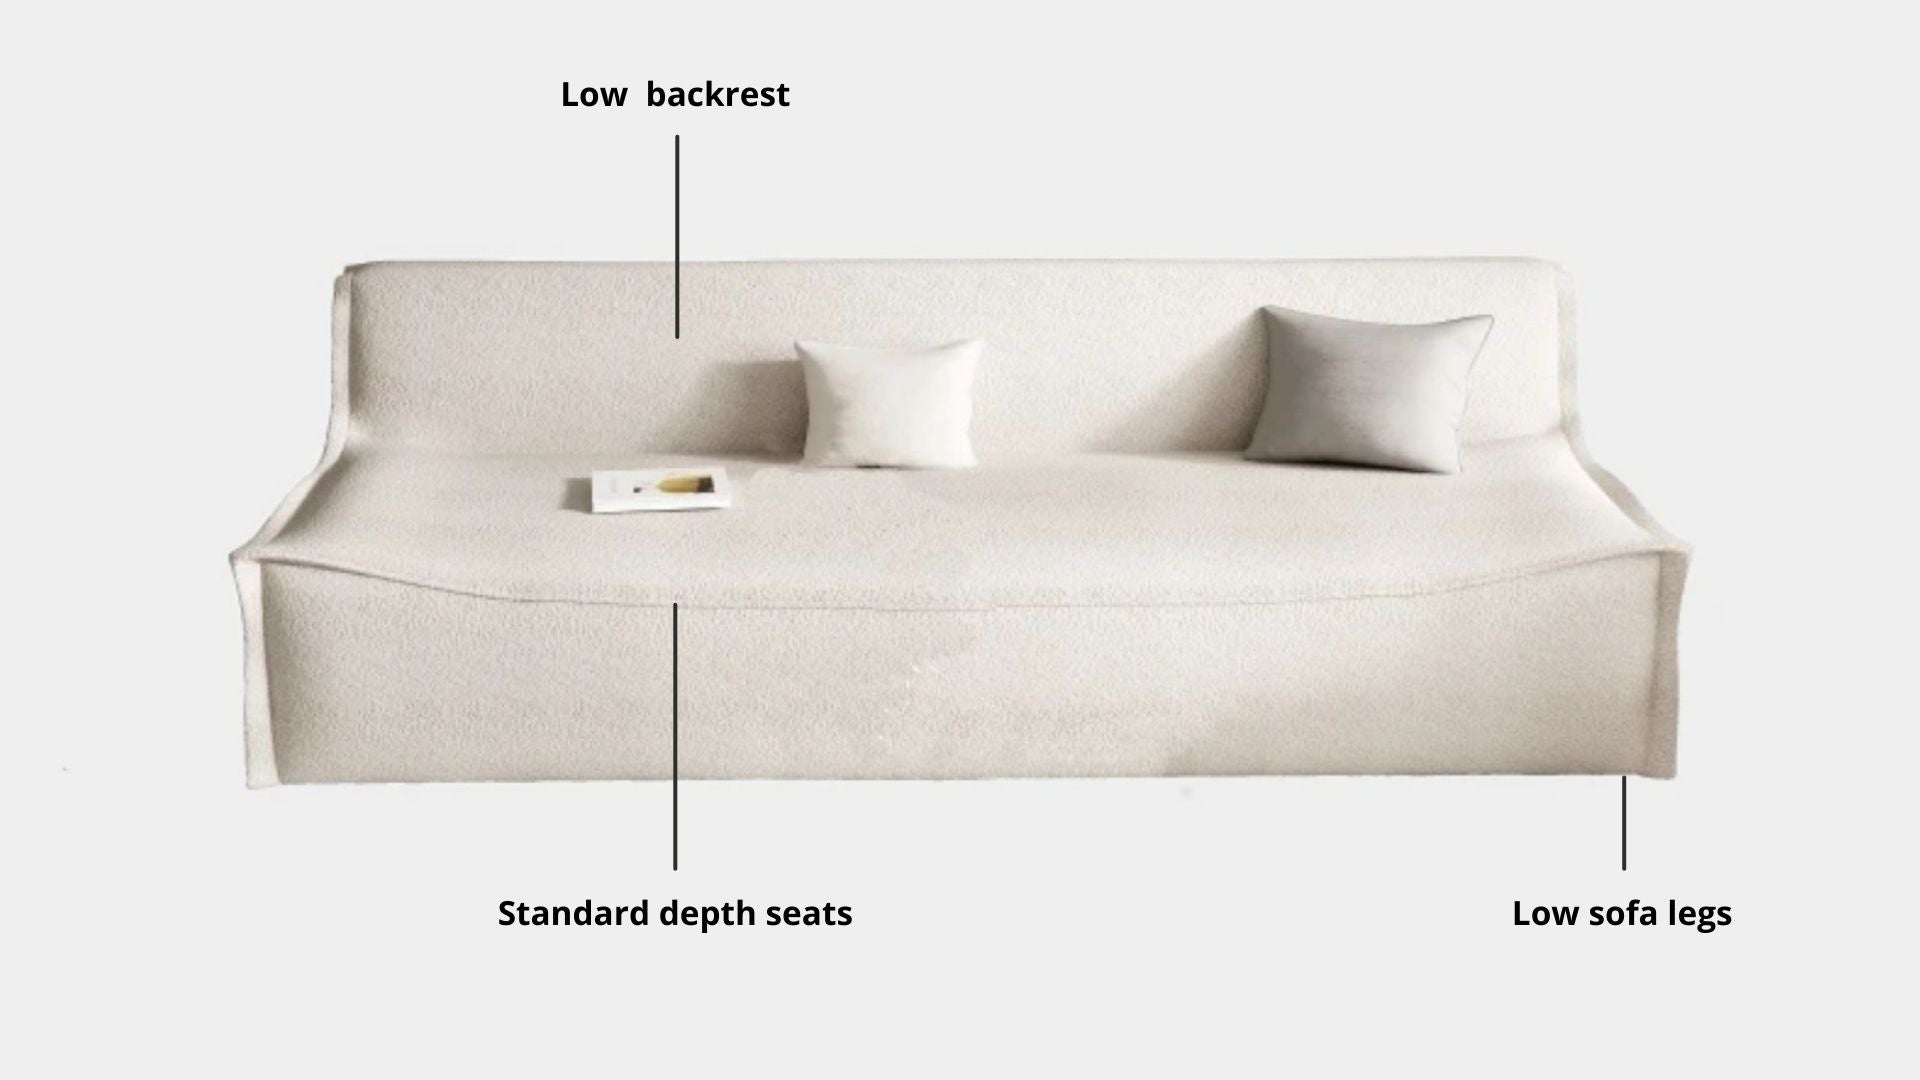 Key features such as armrest thickness, cushion height, seat depth and sofa leg height for Cubo Fabric Sofa